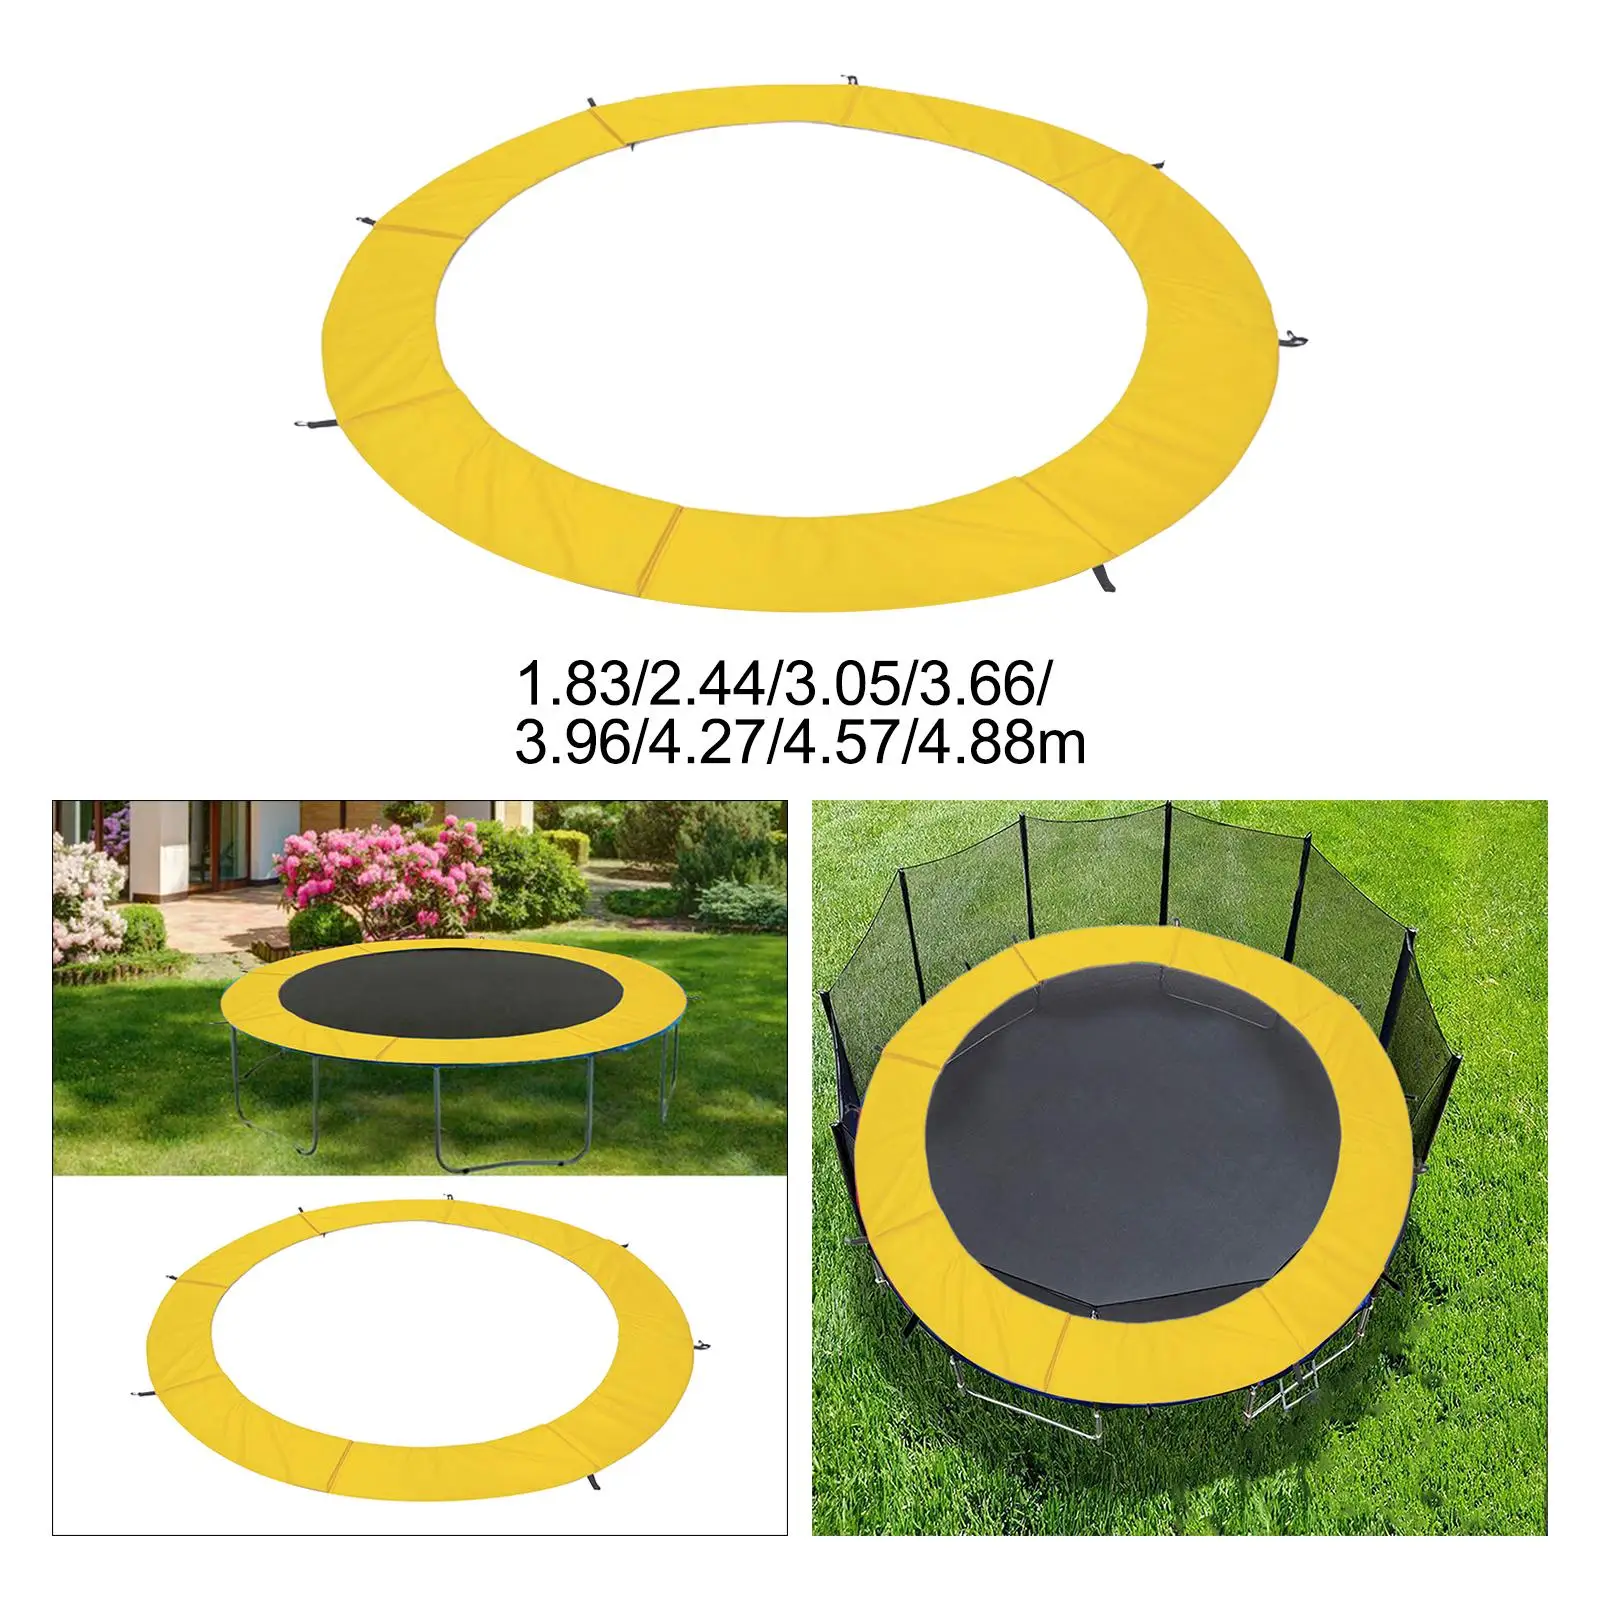 Trampoline Pad Cover Side Guard Easy to Install Replacement Safety Pad